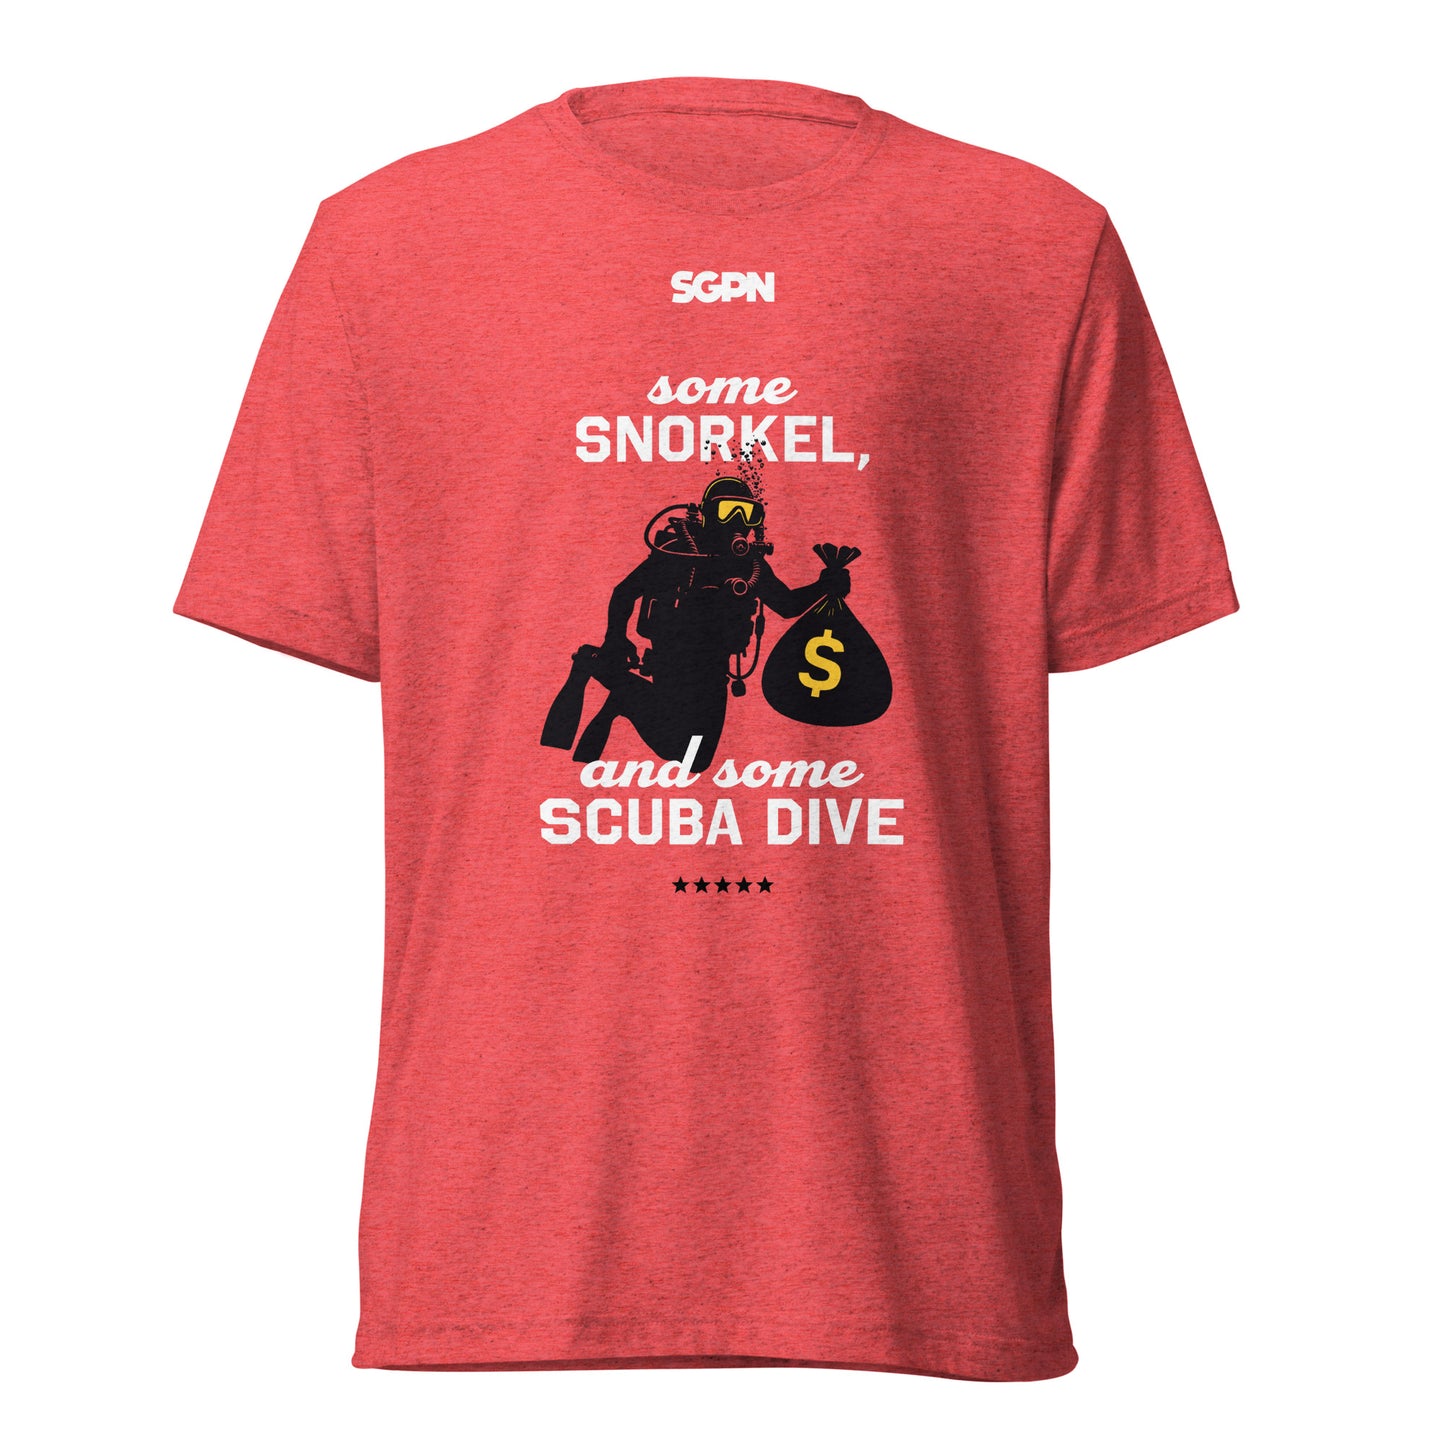 Some Snorkel, And Some Scuba Dive - Short sleeve t-shirt